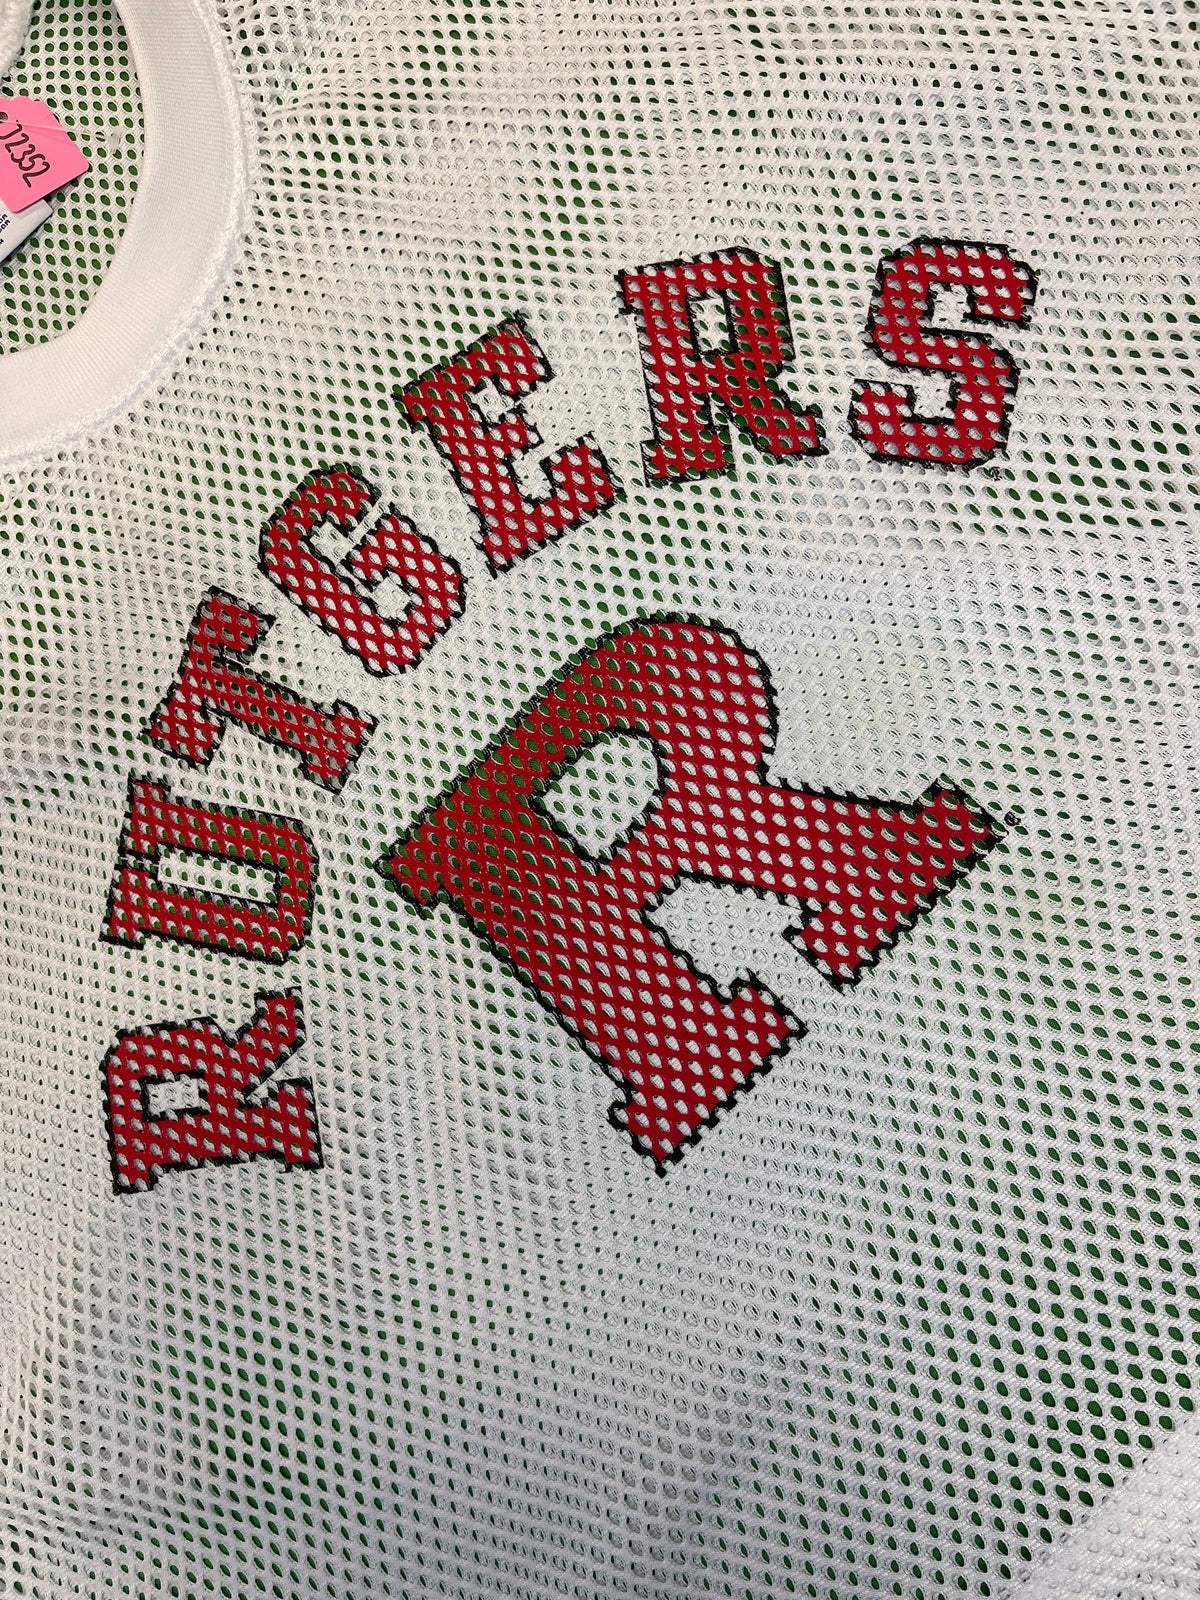 NCAA Rutgers Scarlet Knights Champion Vintage Cropped Mesh Jersey Men's Small